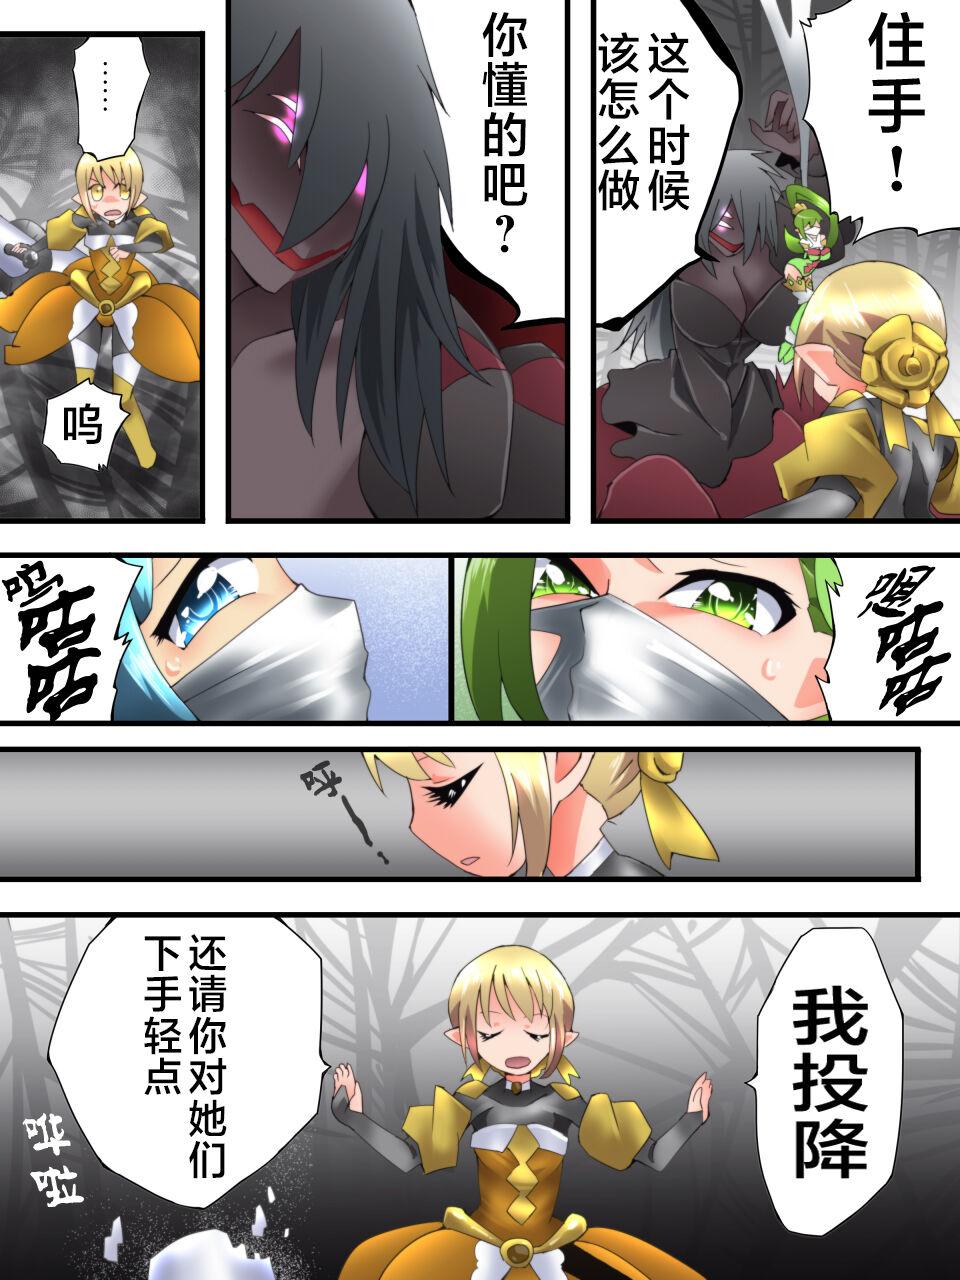 Fairy Knight Fairy Bloom Ep5 Chinese Ver. 26